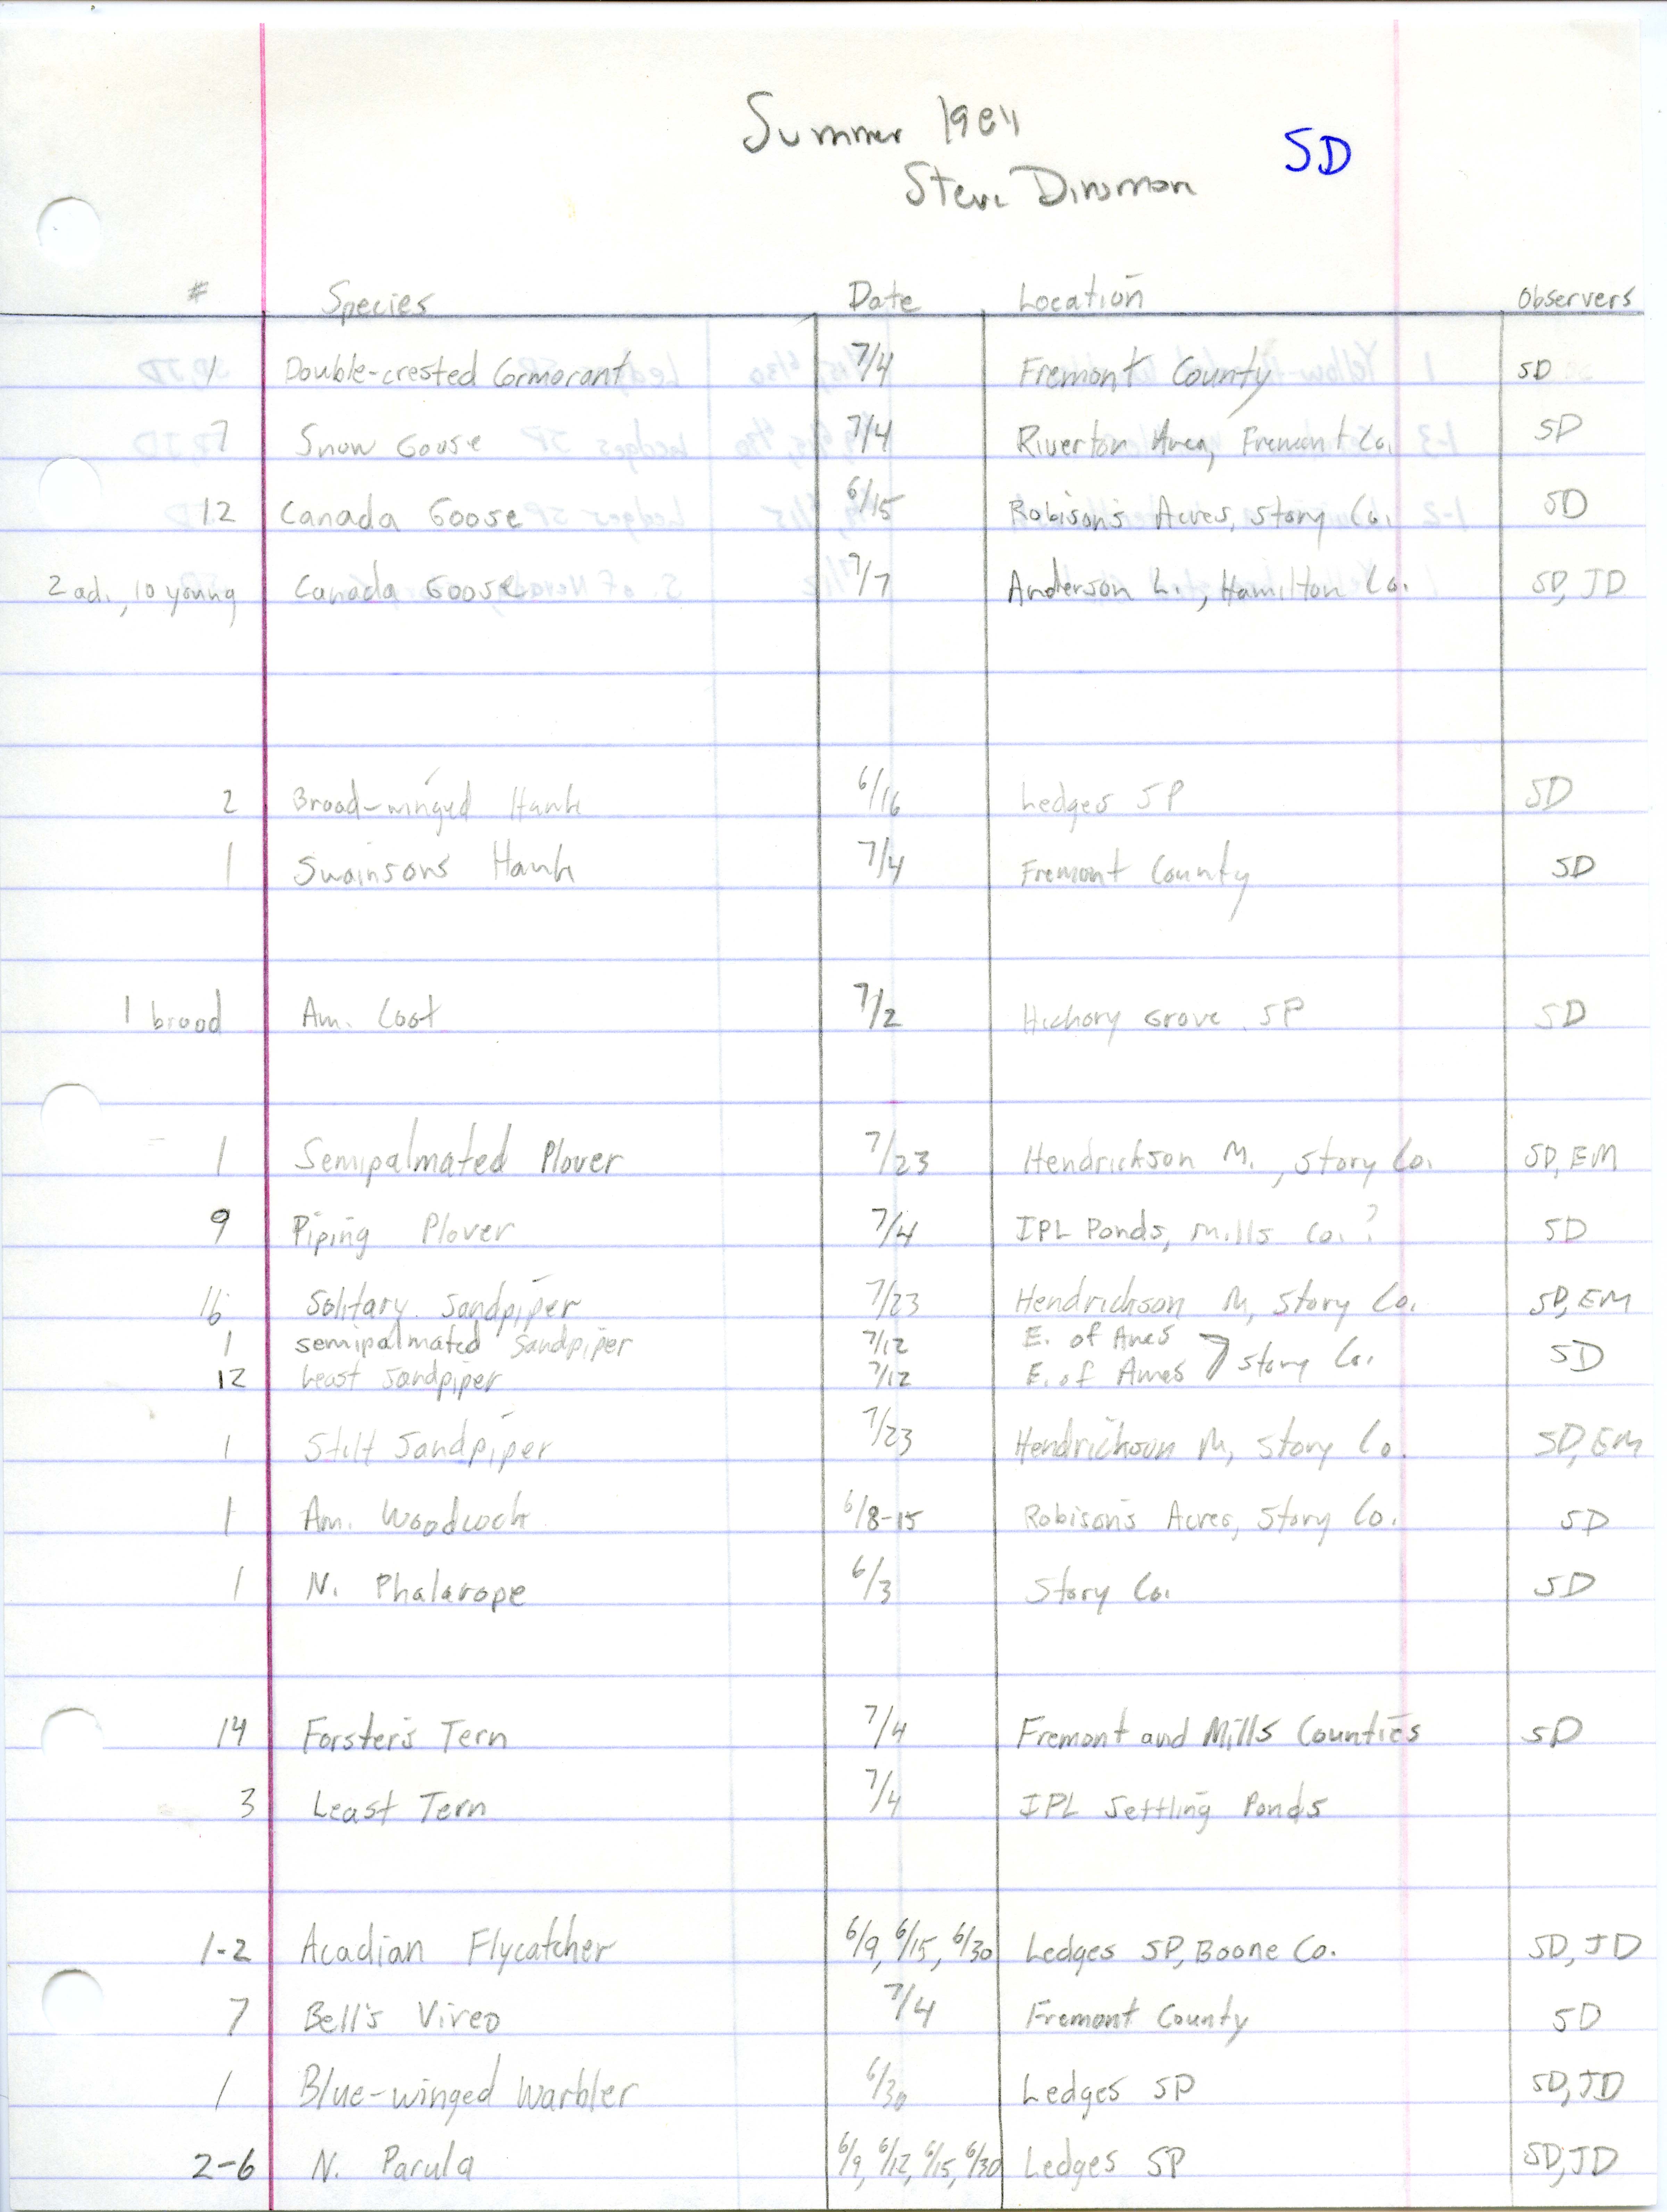 Field notes contributed by Stephen J. Dinsmore, summer 1984